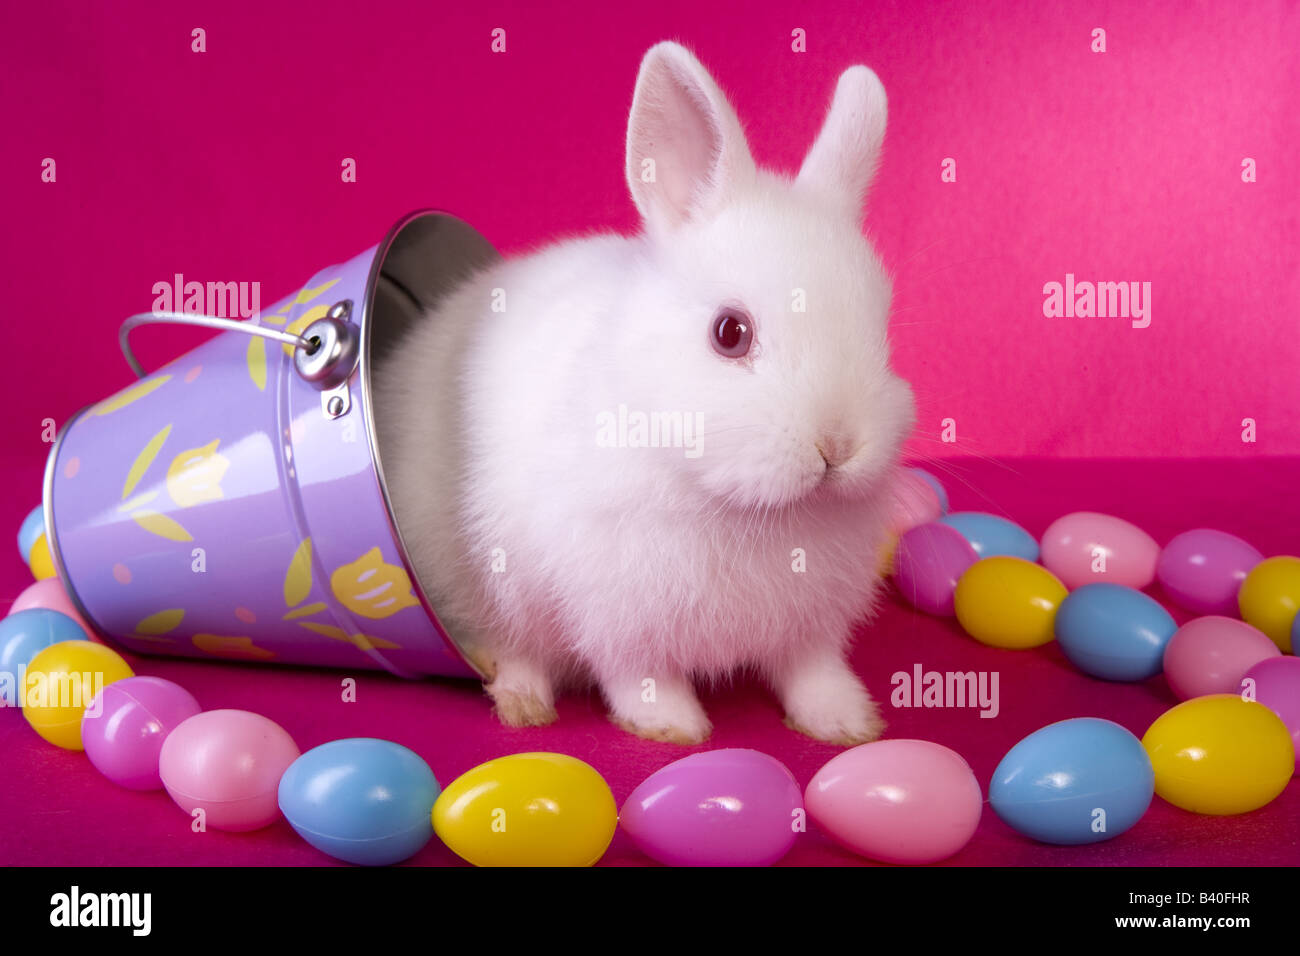 Cute white baby Easter Netherland Dwarf bunny rabbit on hot pink